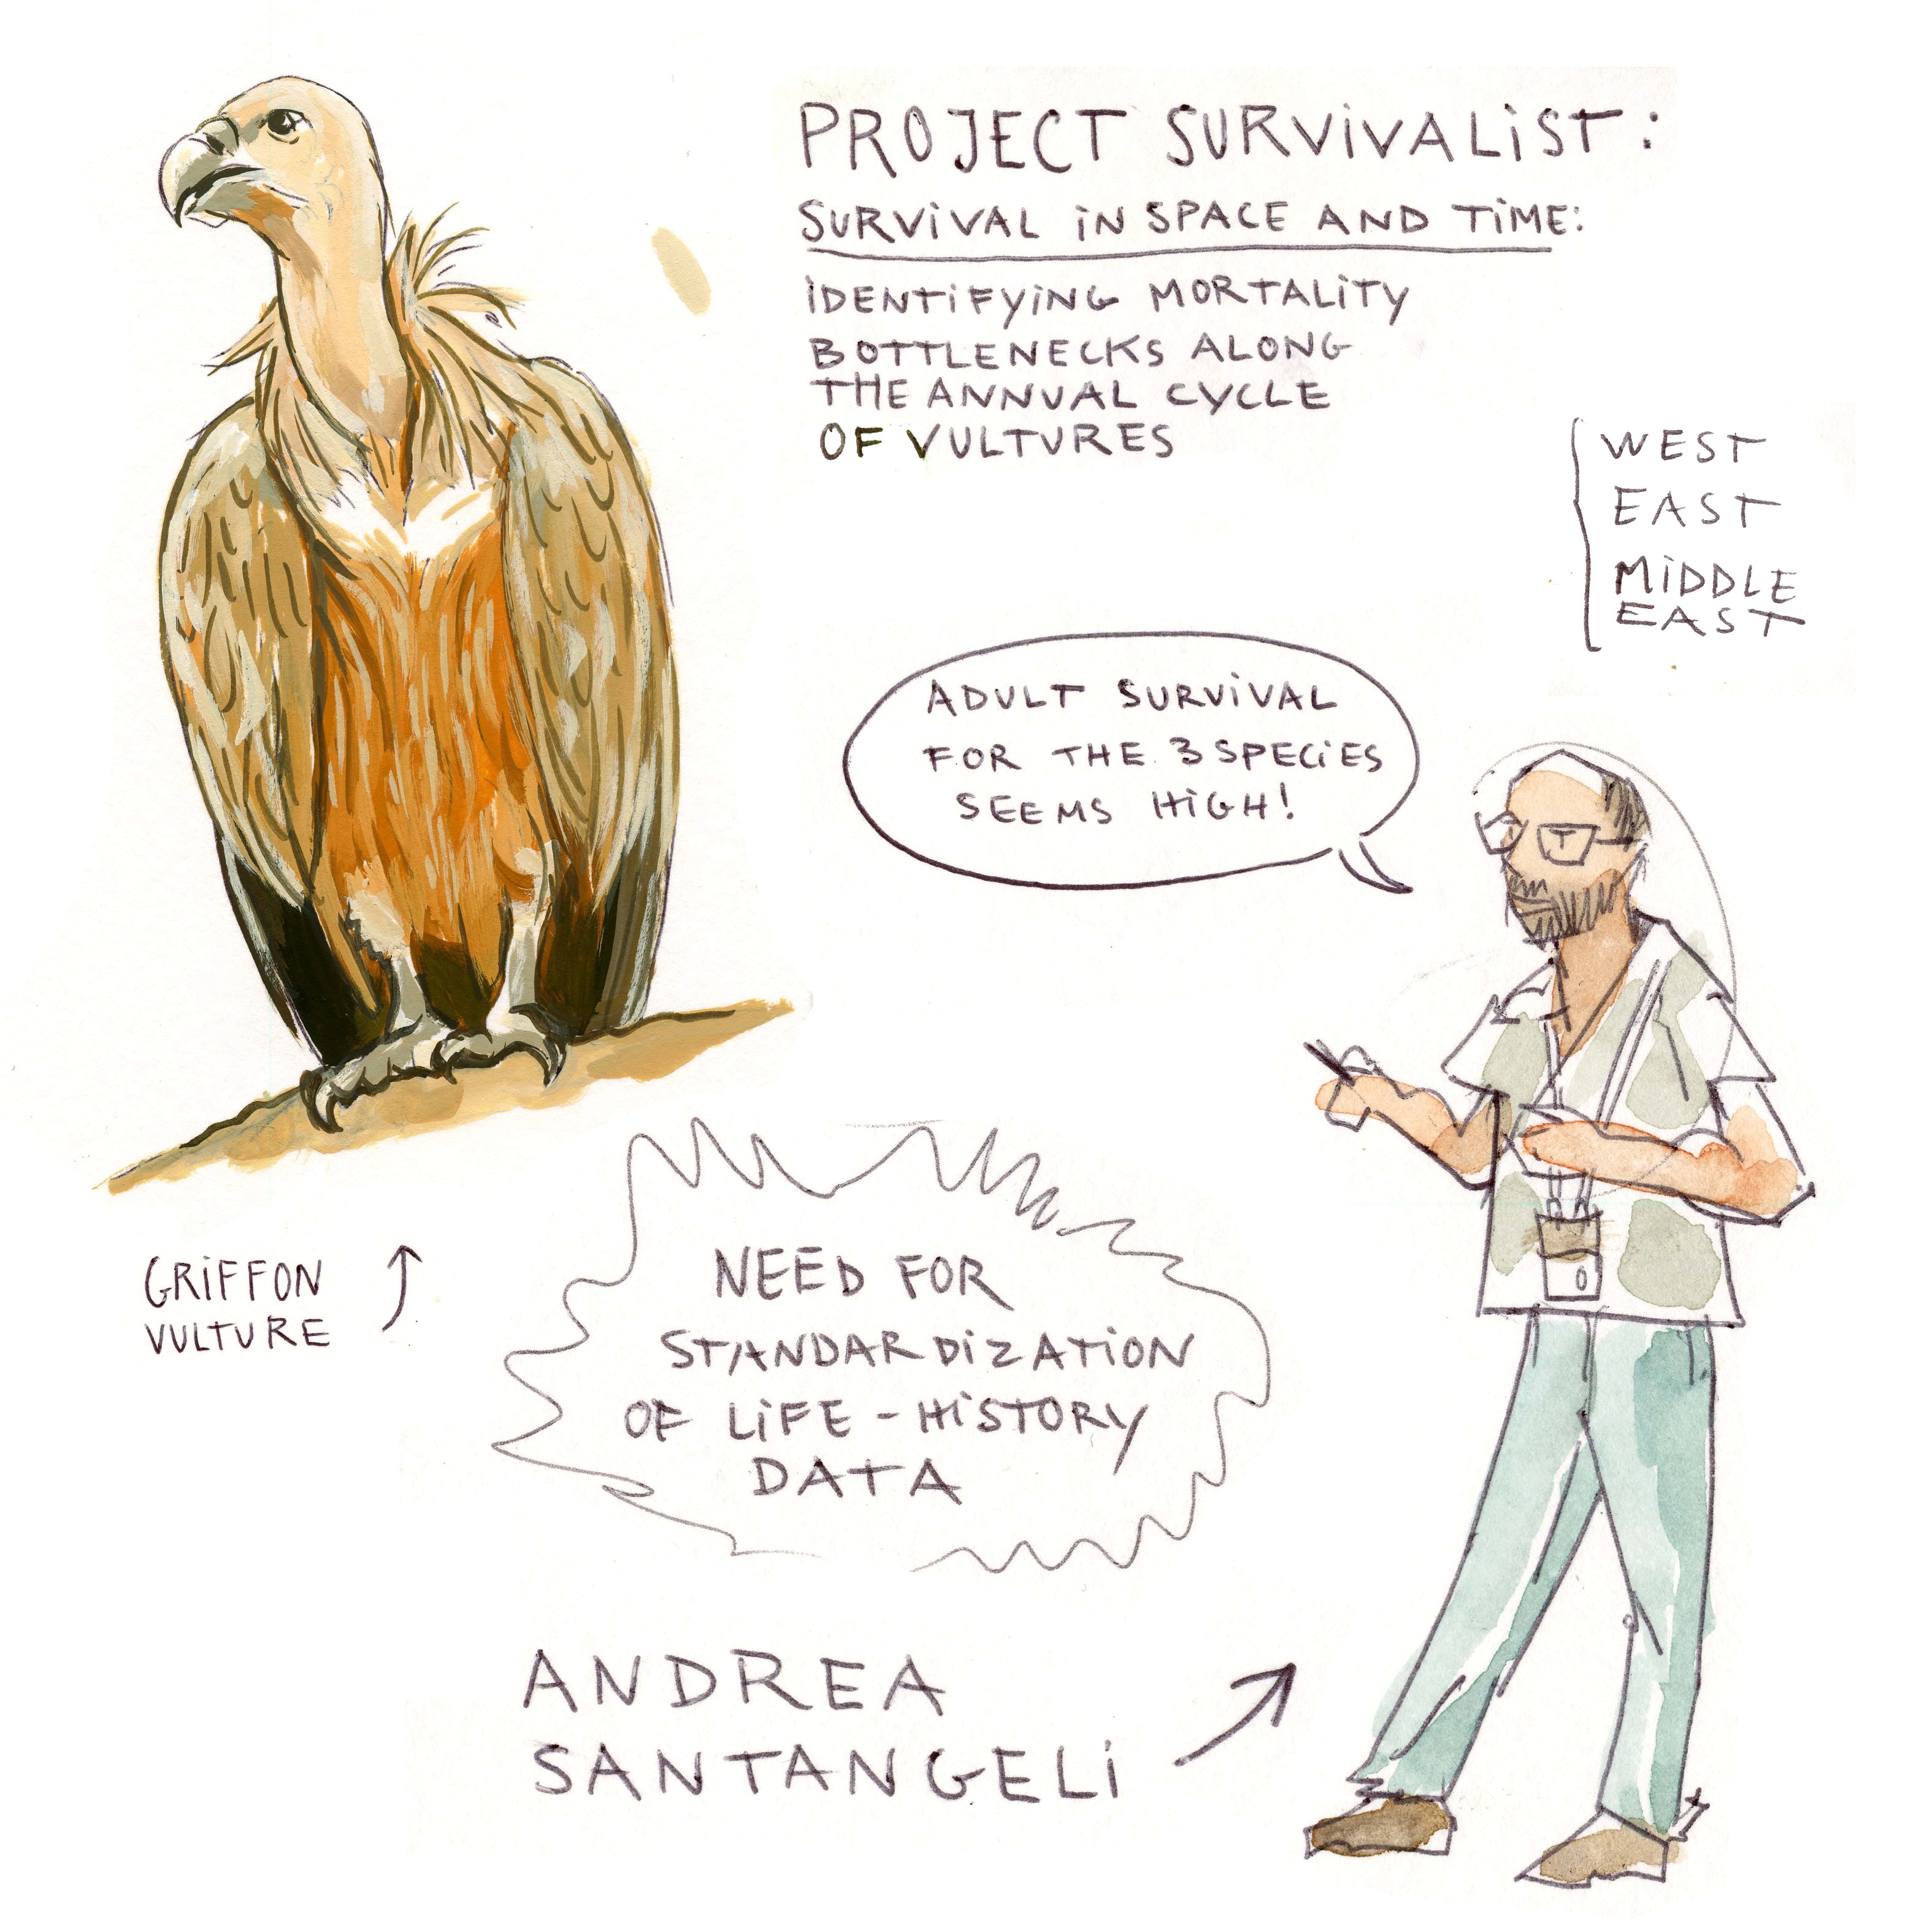 Why we need vultures - Vulture Conservation Foundation